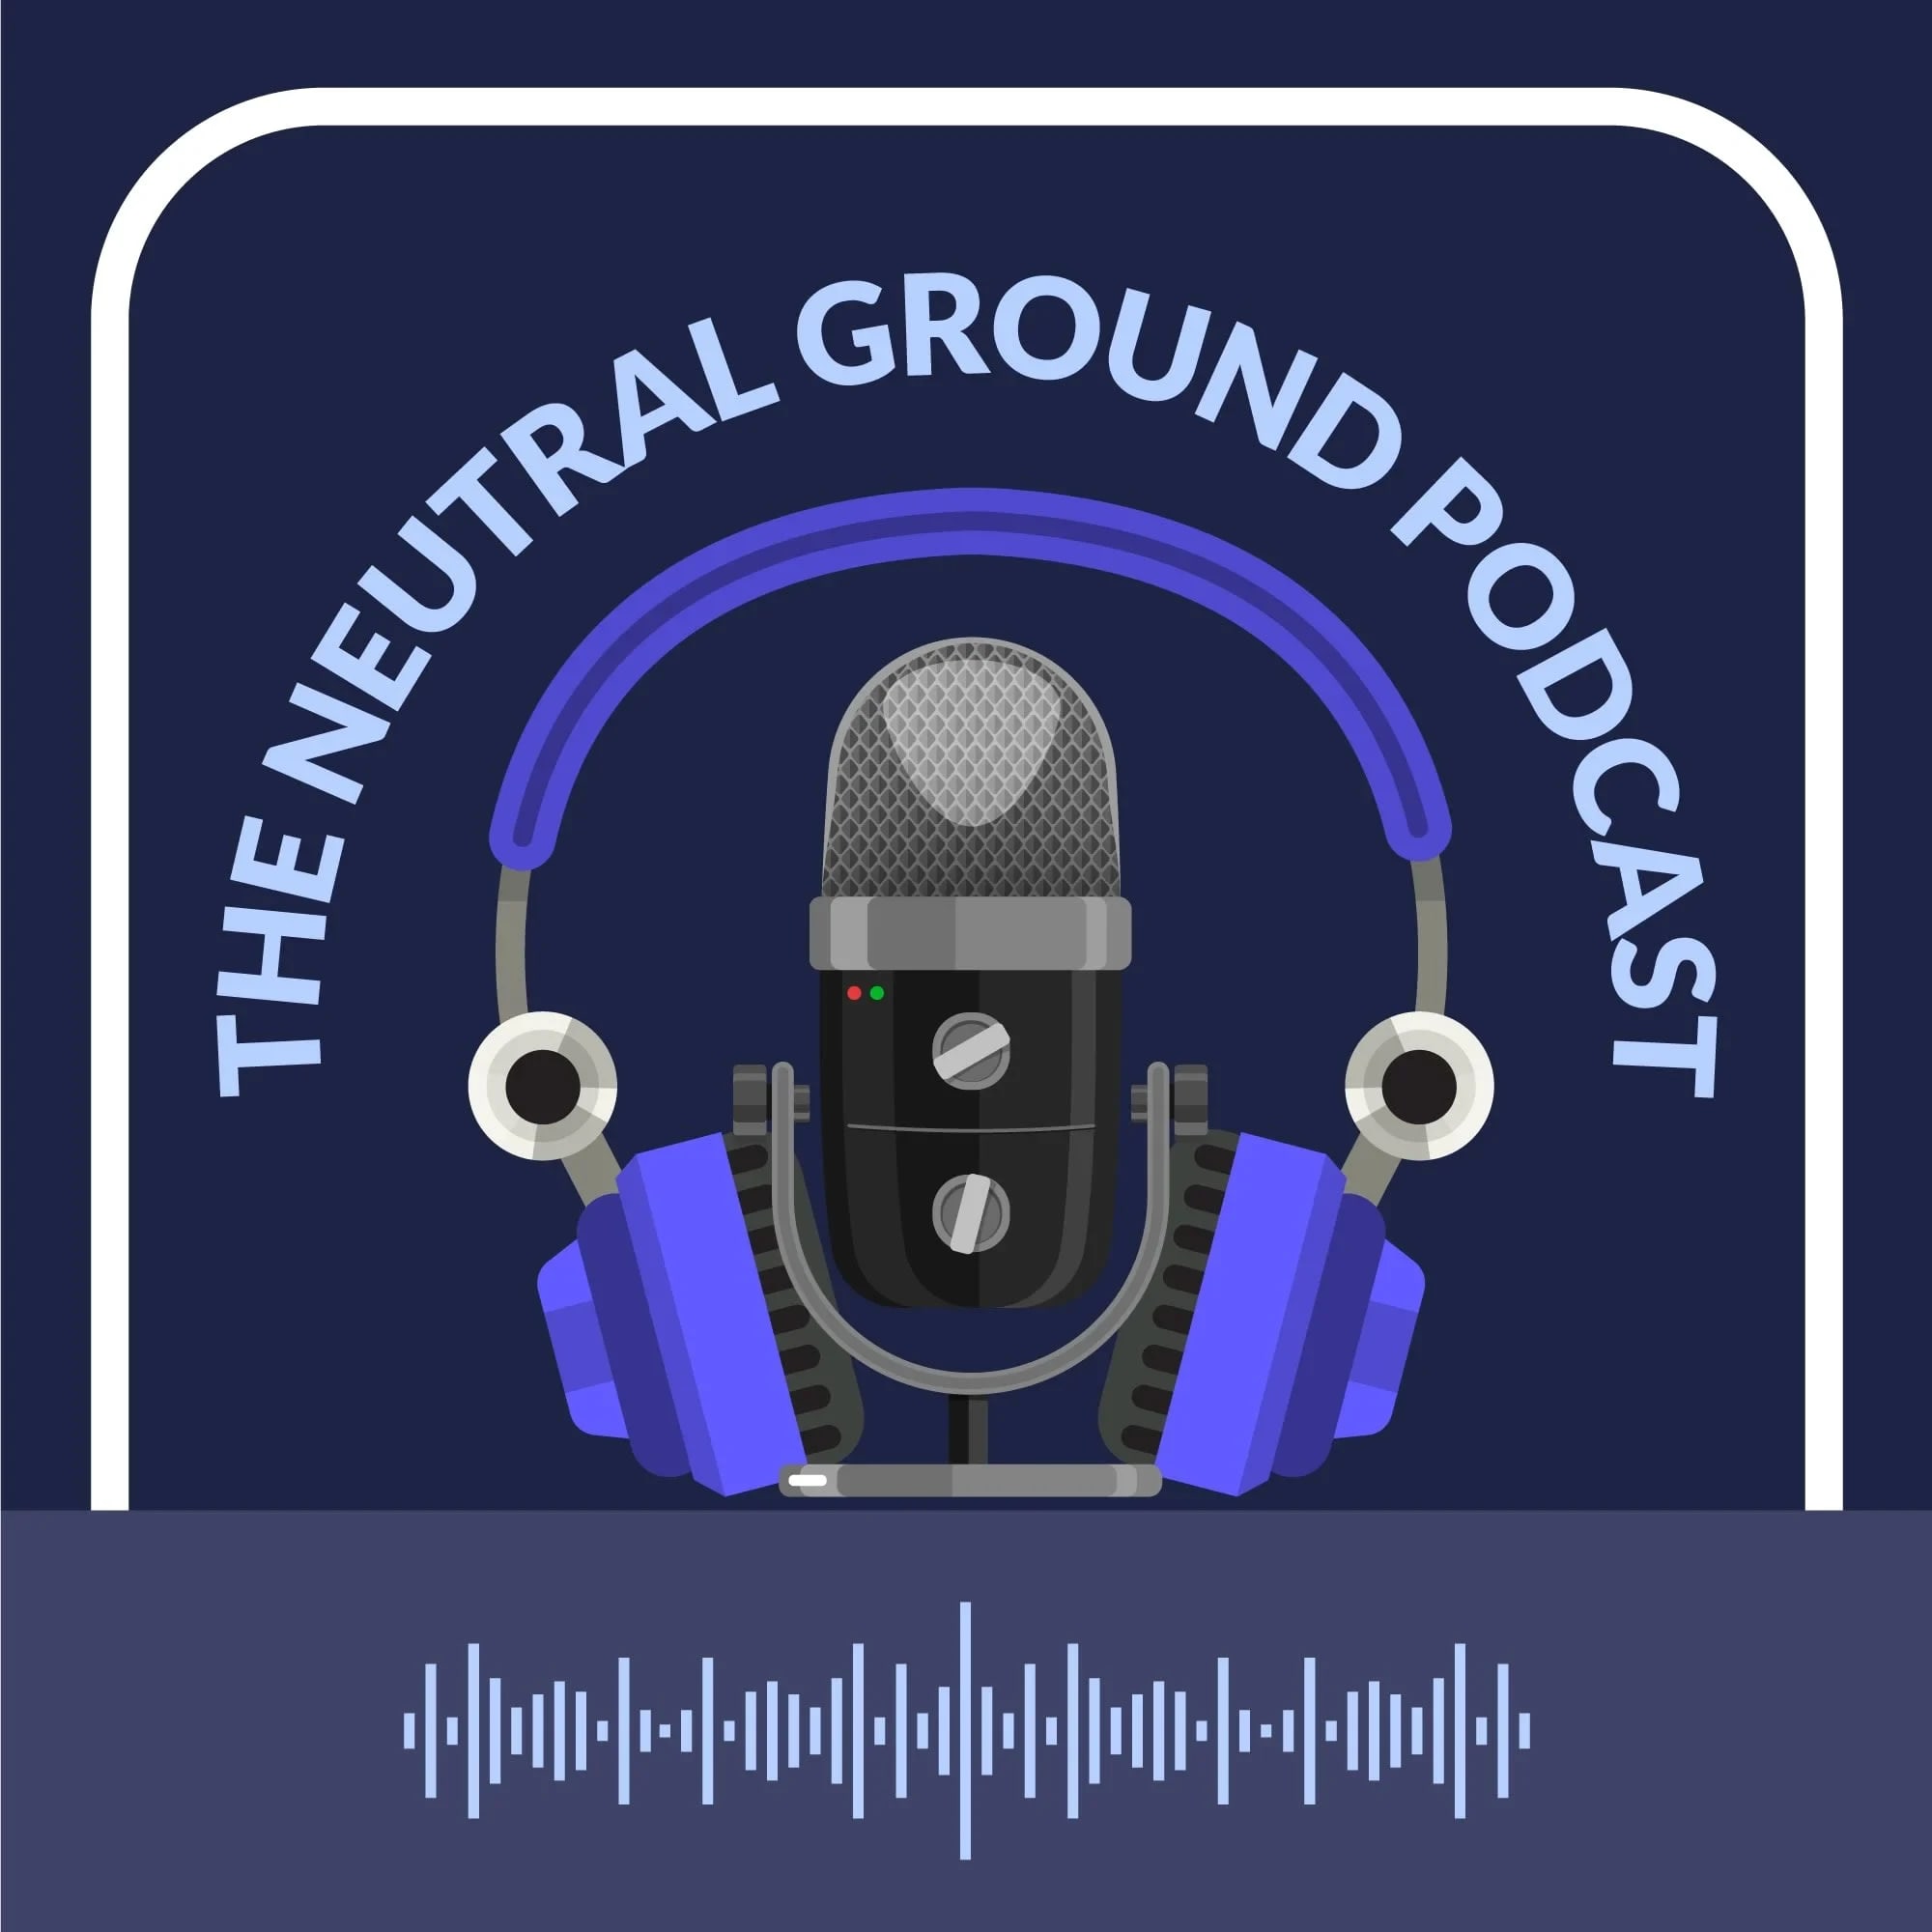 The Neutral Ground Podcast